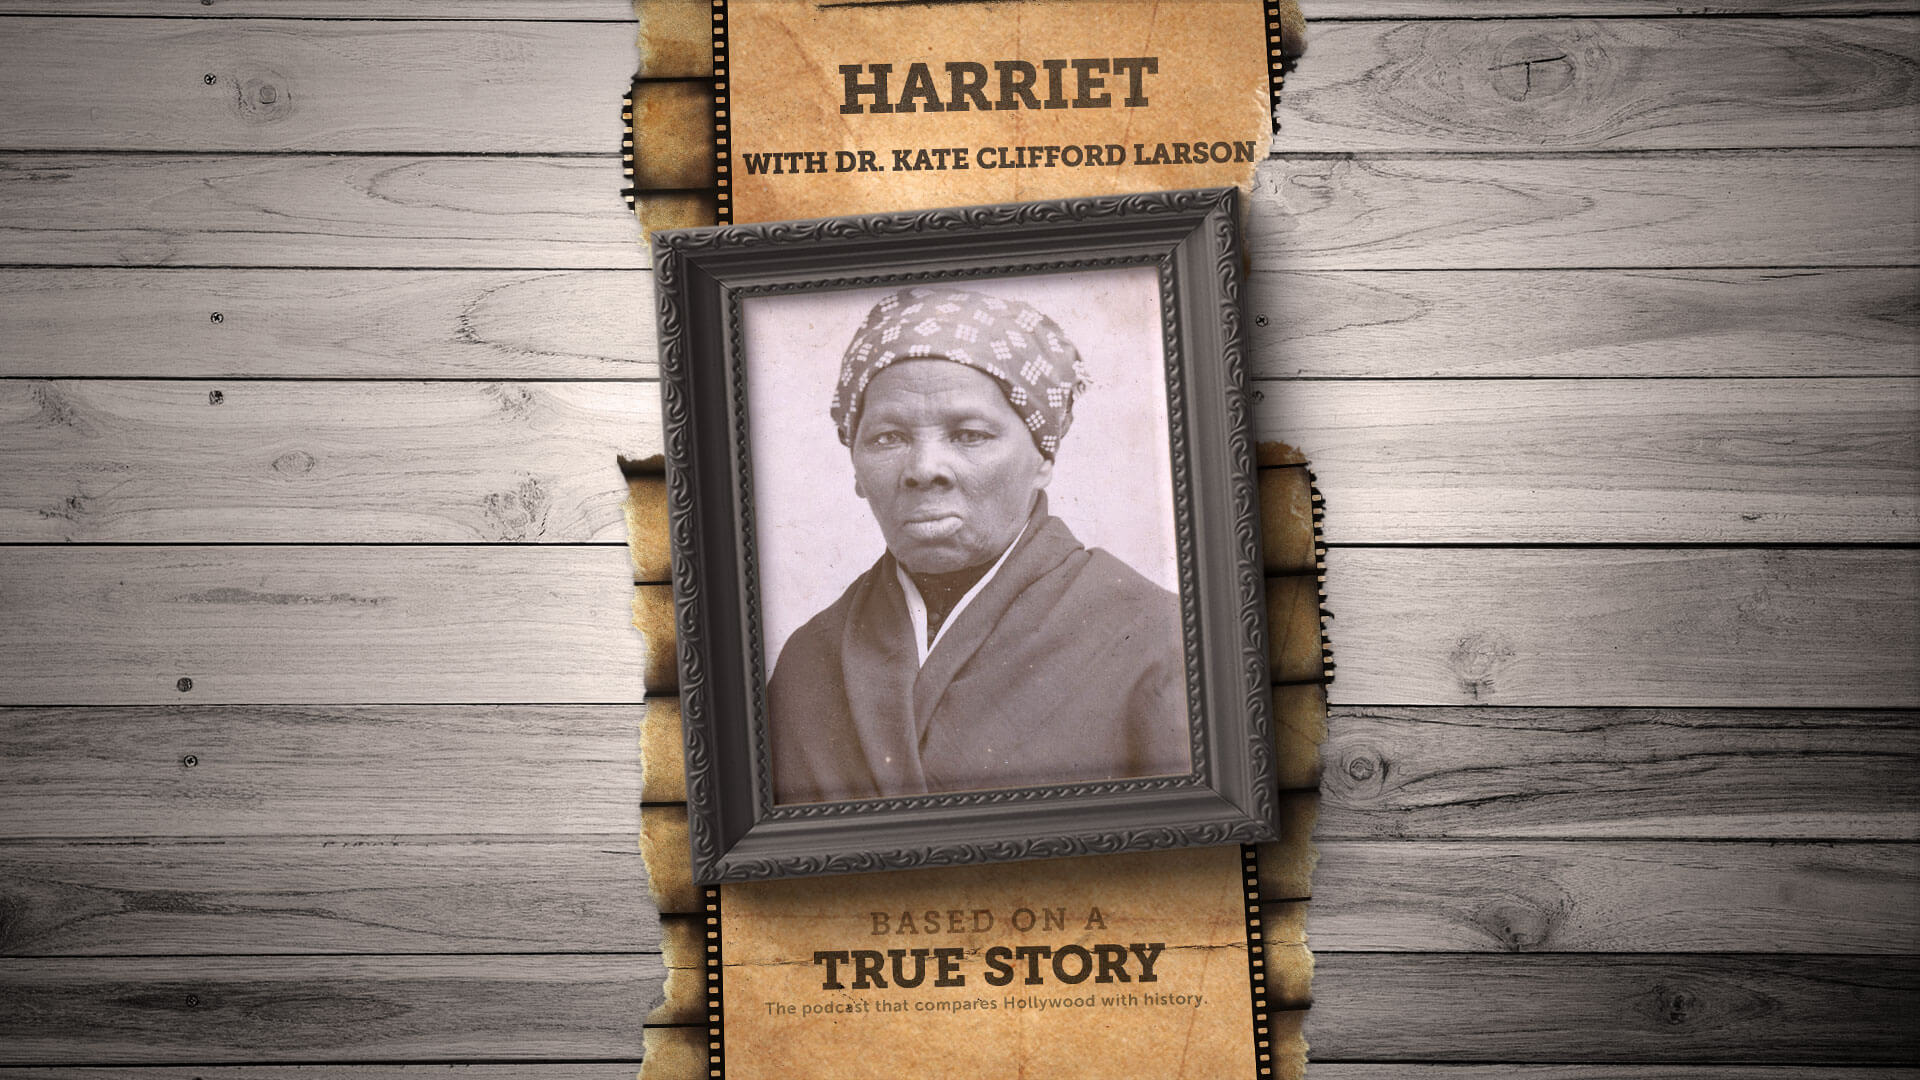 The true story of Harriet Tubman